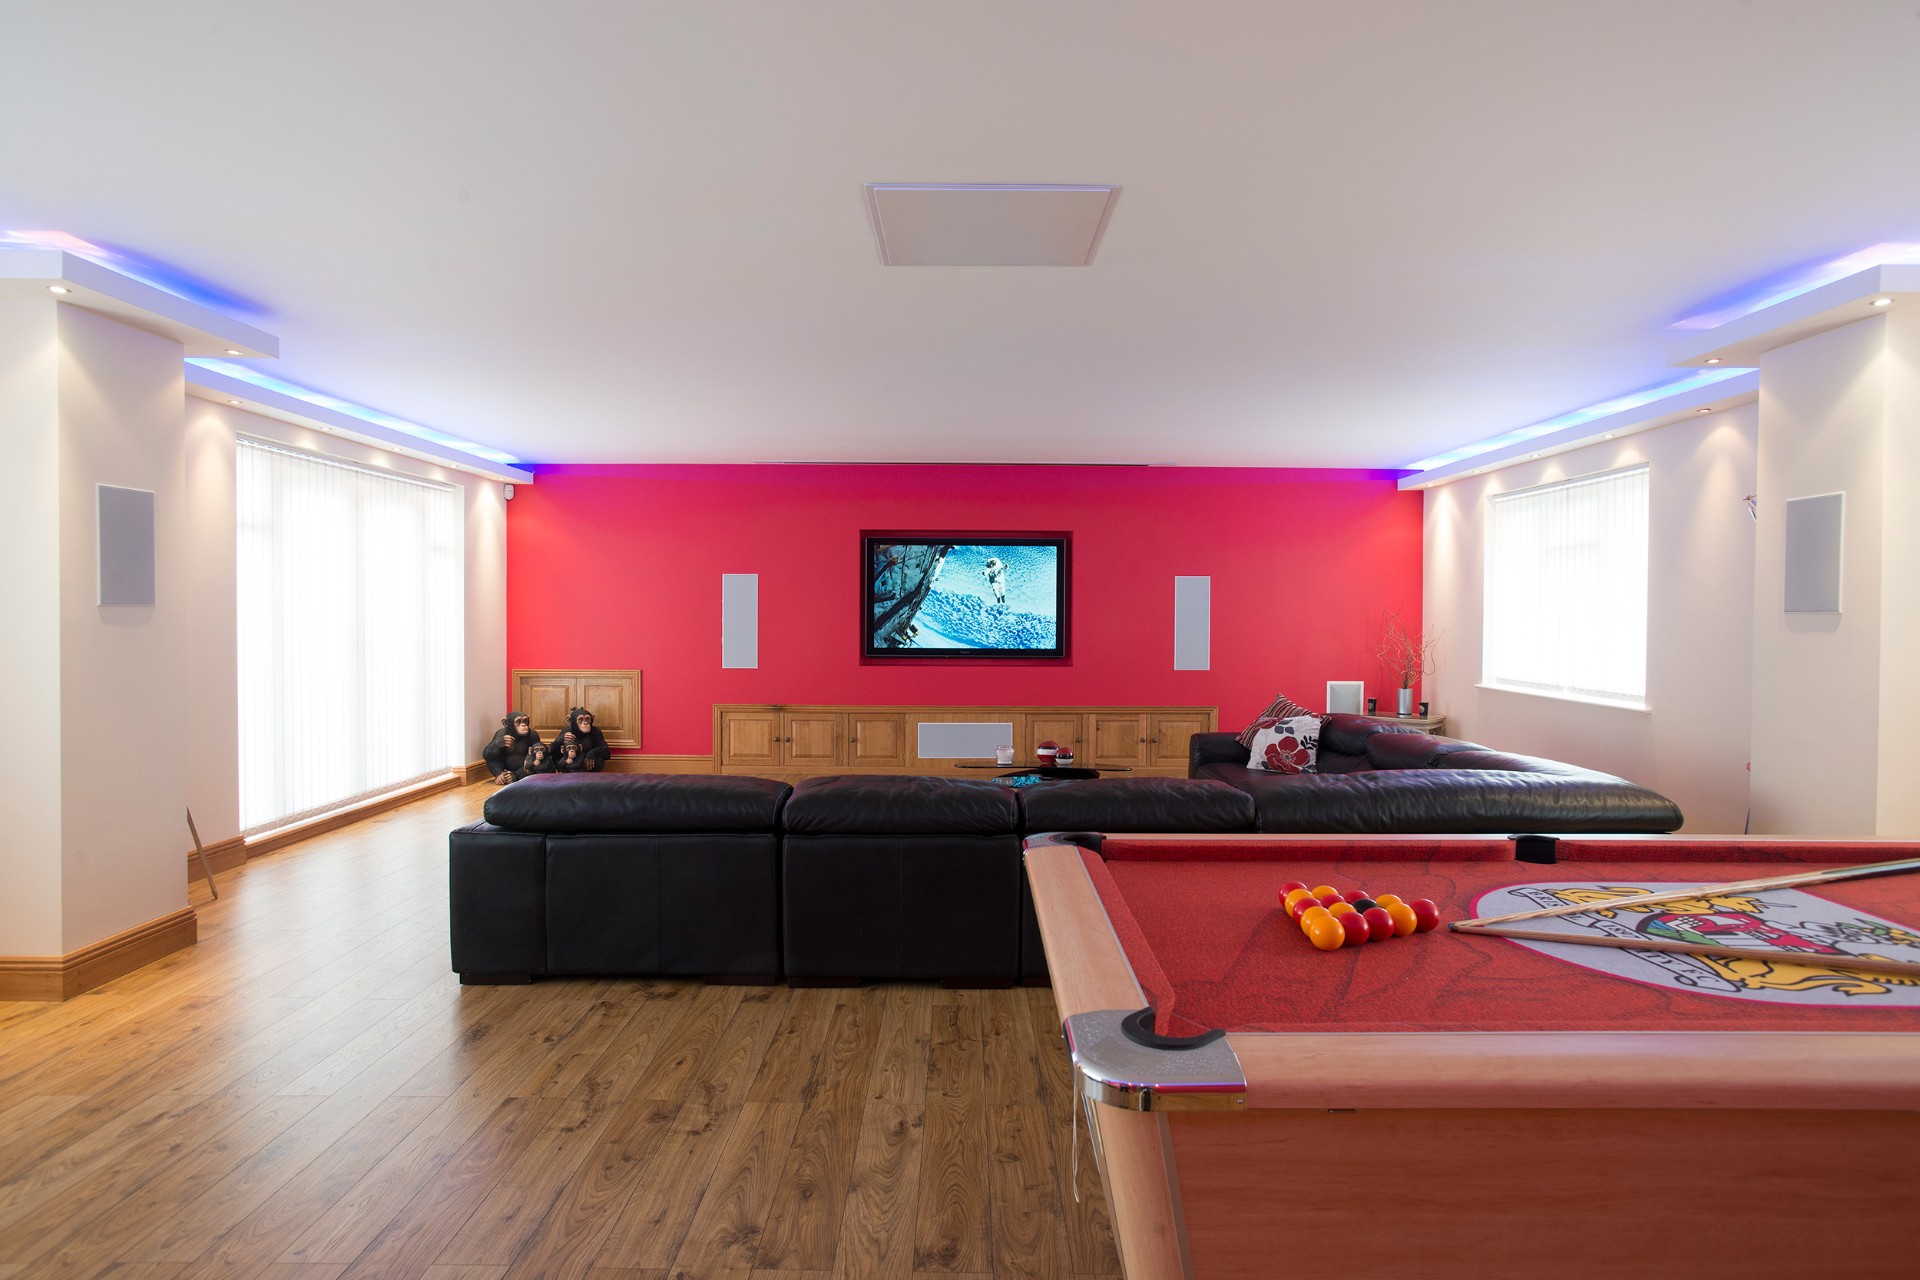 Home cinema system with integrated multiple screens throughout the house Image